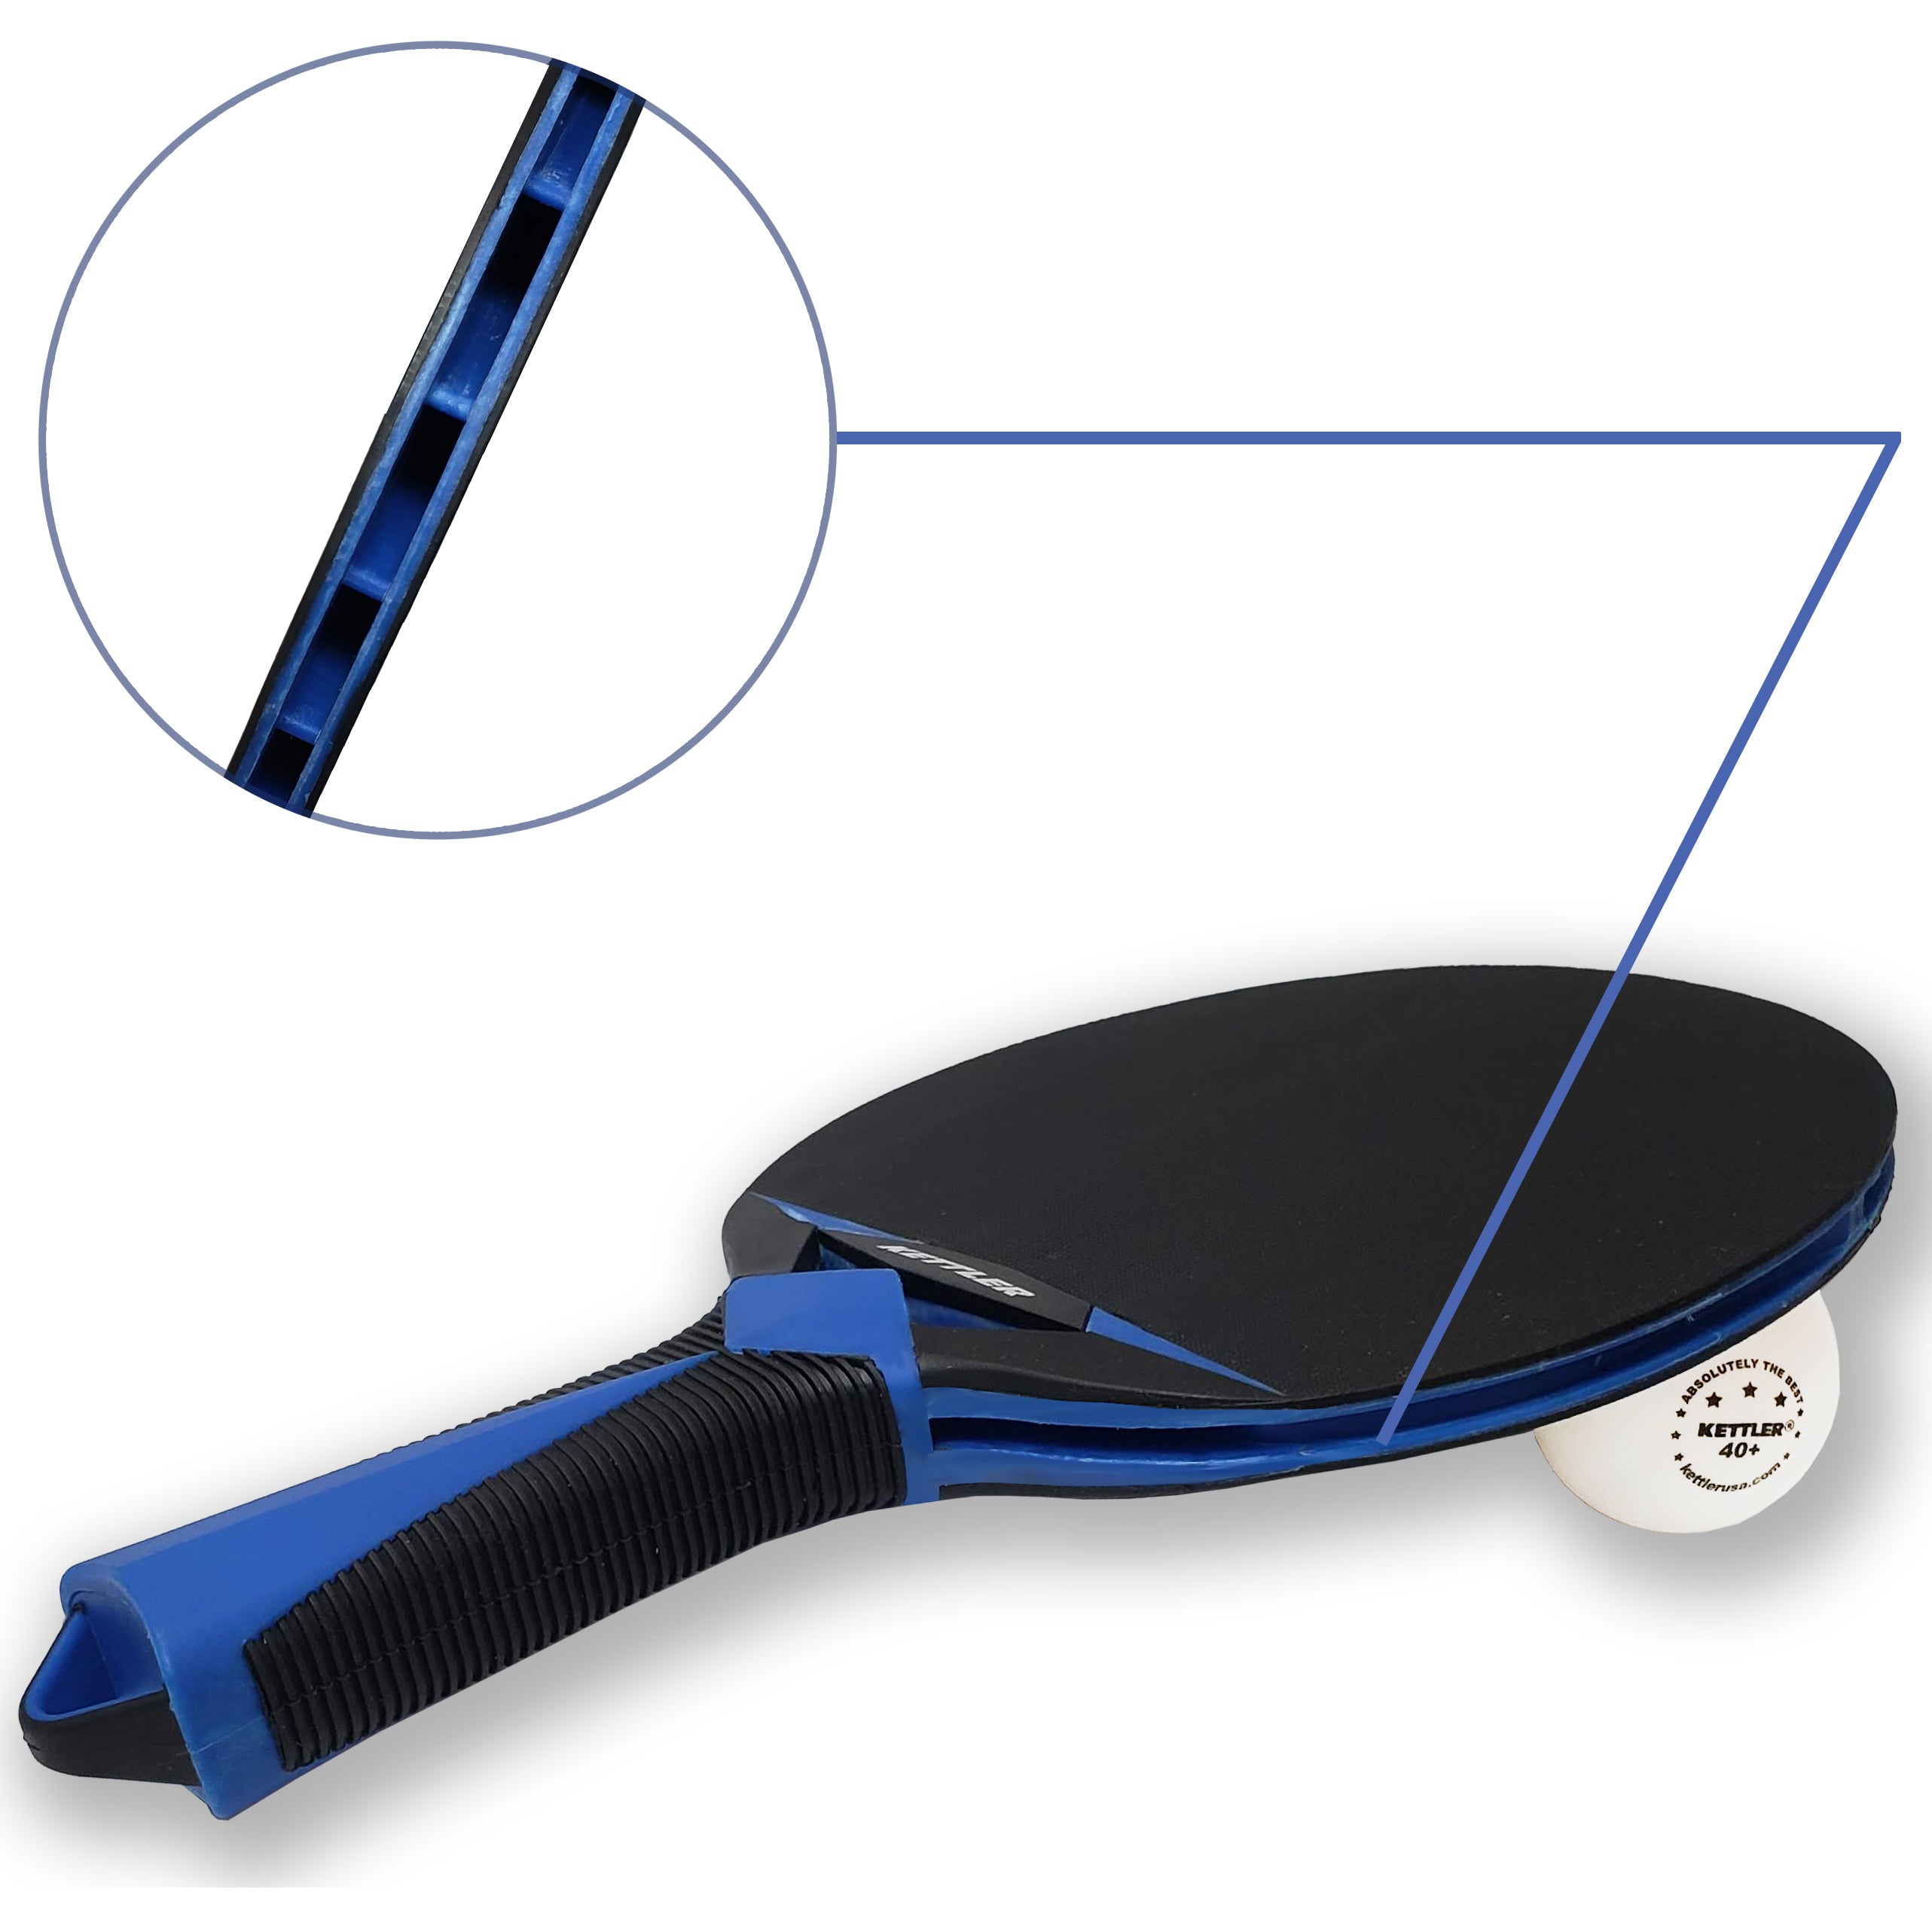 Halo X Outdoor 2 Player Table Tennis Racket Set